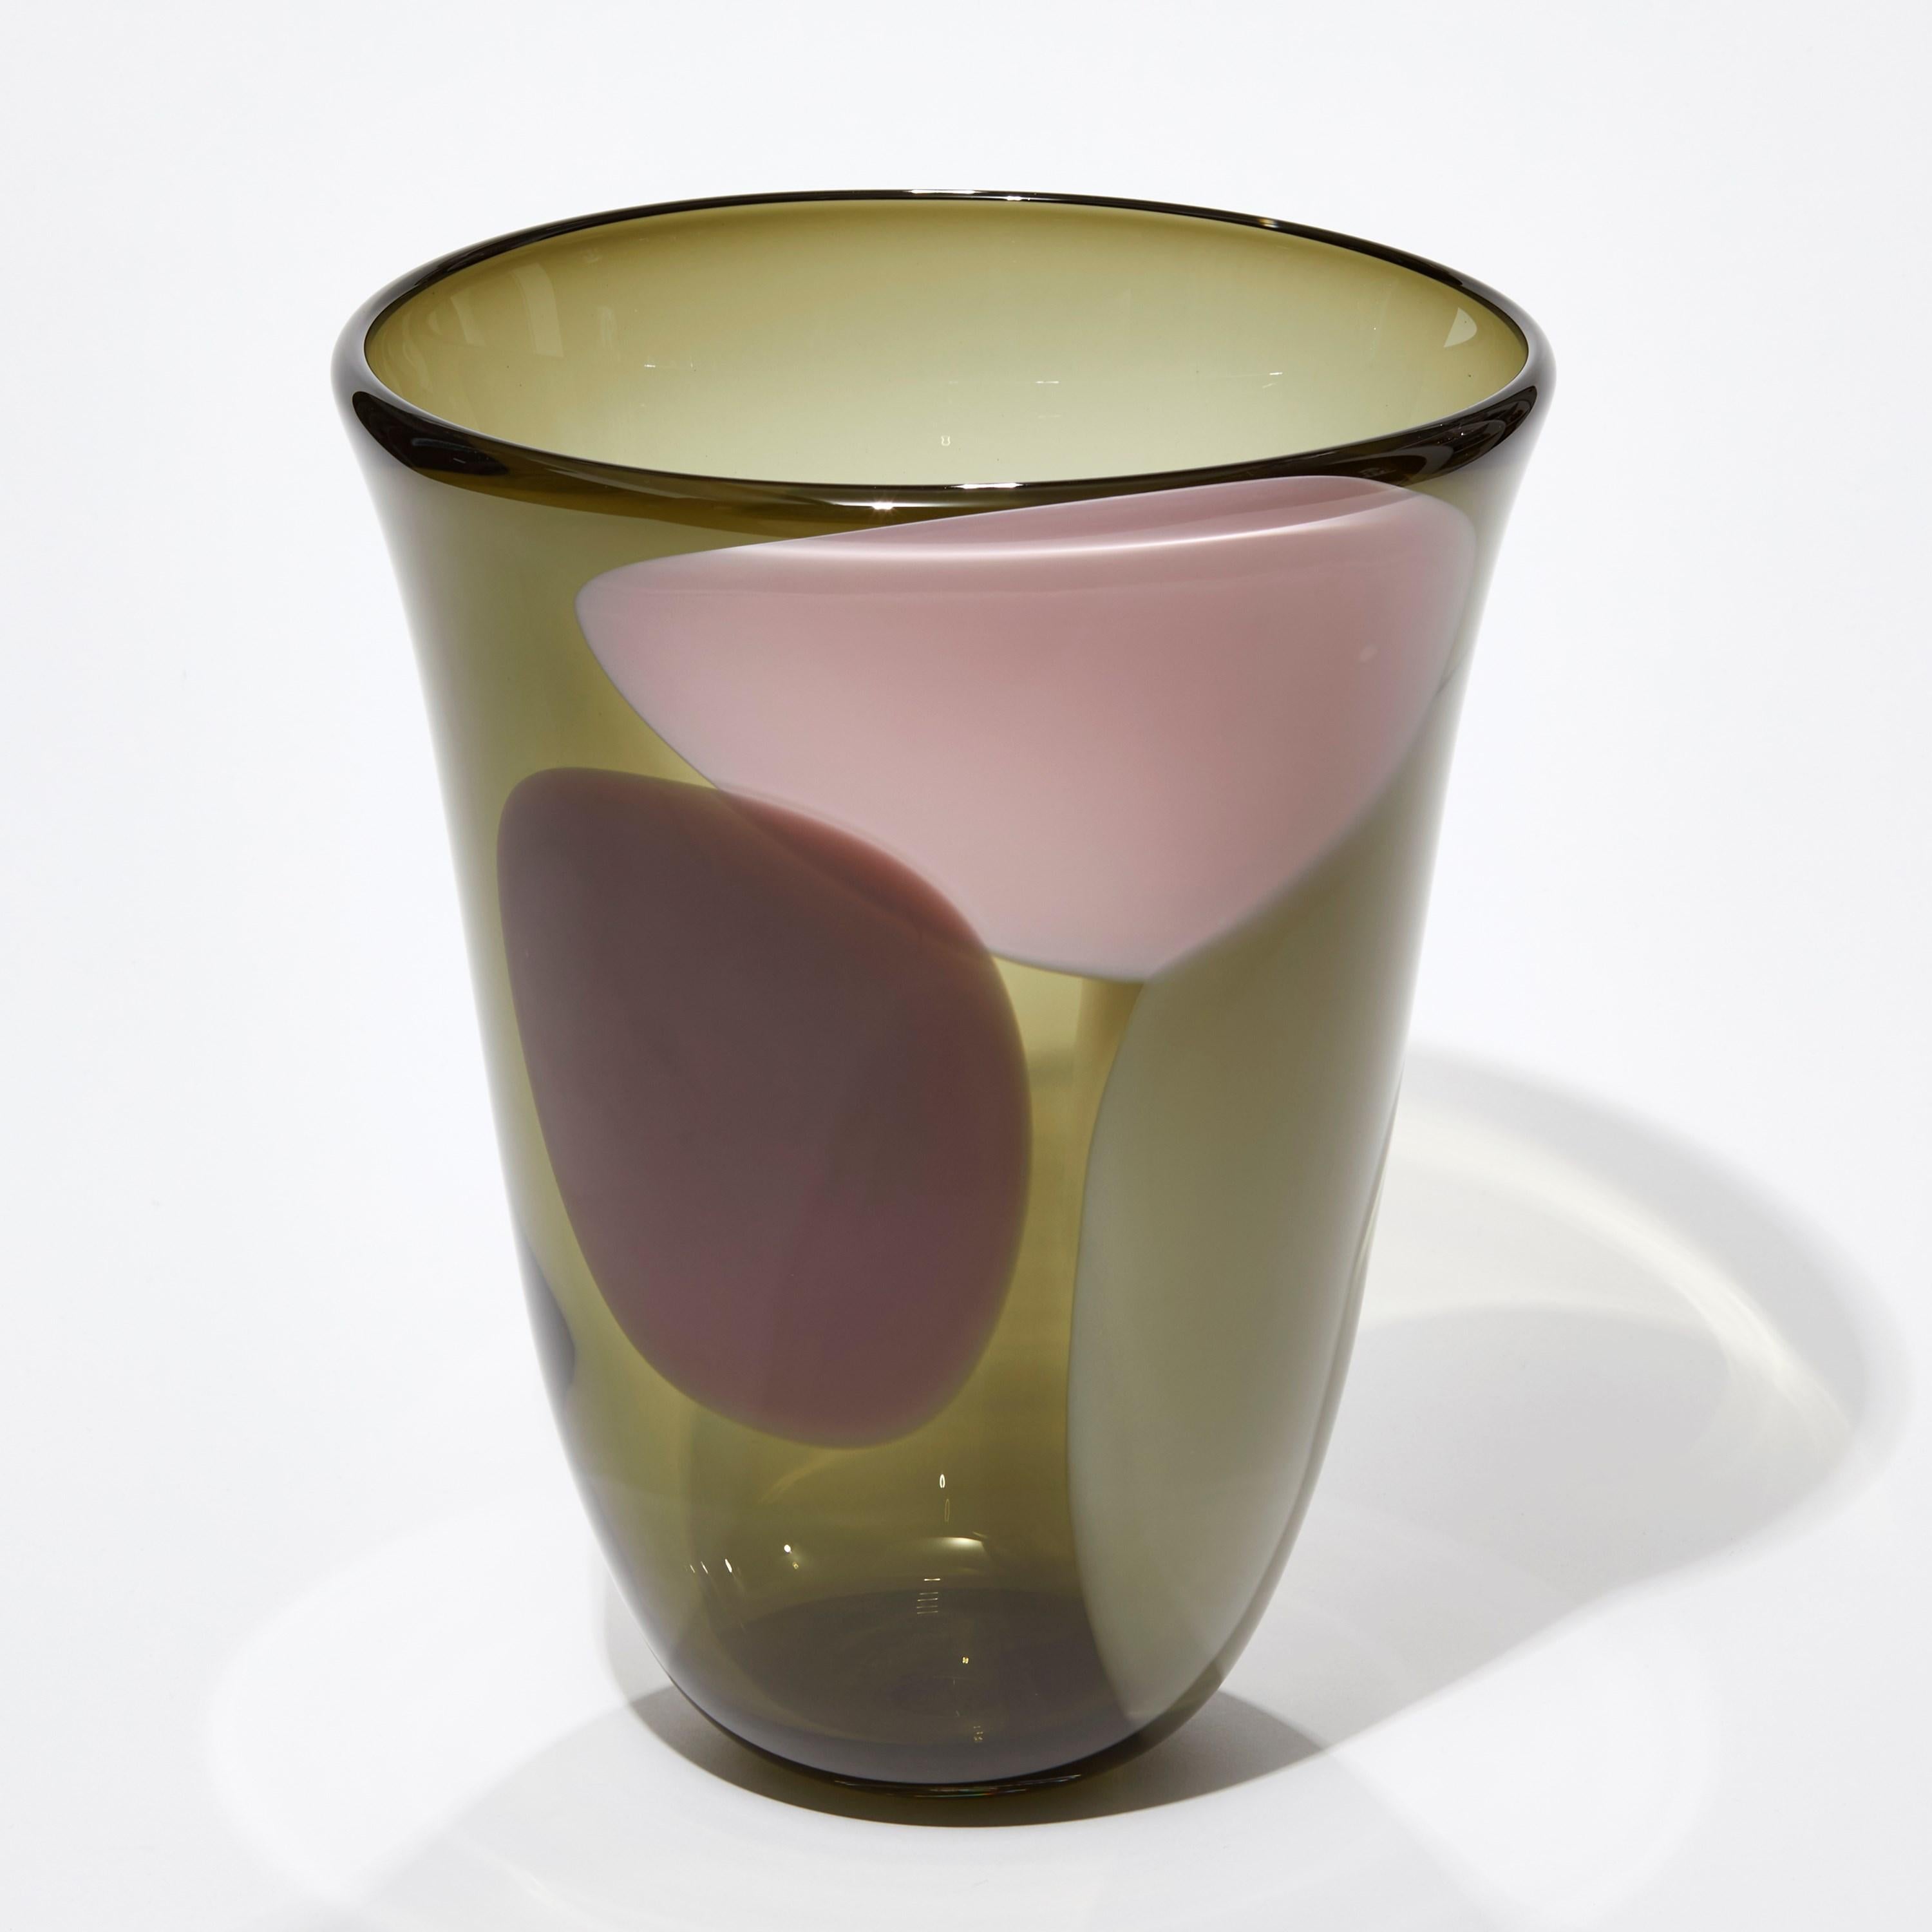 'Rosalie', from the Hortus Poetica Collection, is a unique glass sculptural vessel by the Swedish artist, Gunnel Sahlin.

Sahlin’s current passions include exploring the limits of glass materiality, colour, form and light taking her inspiration